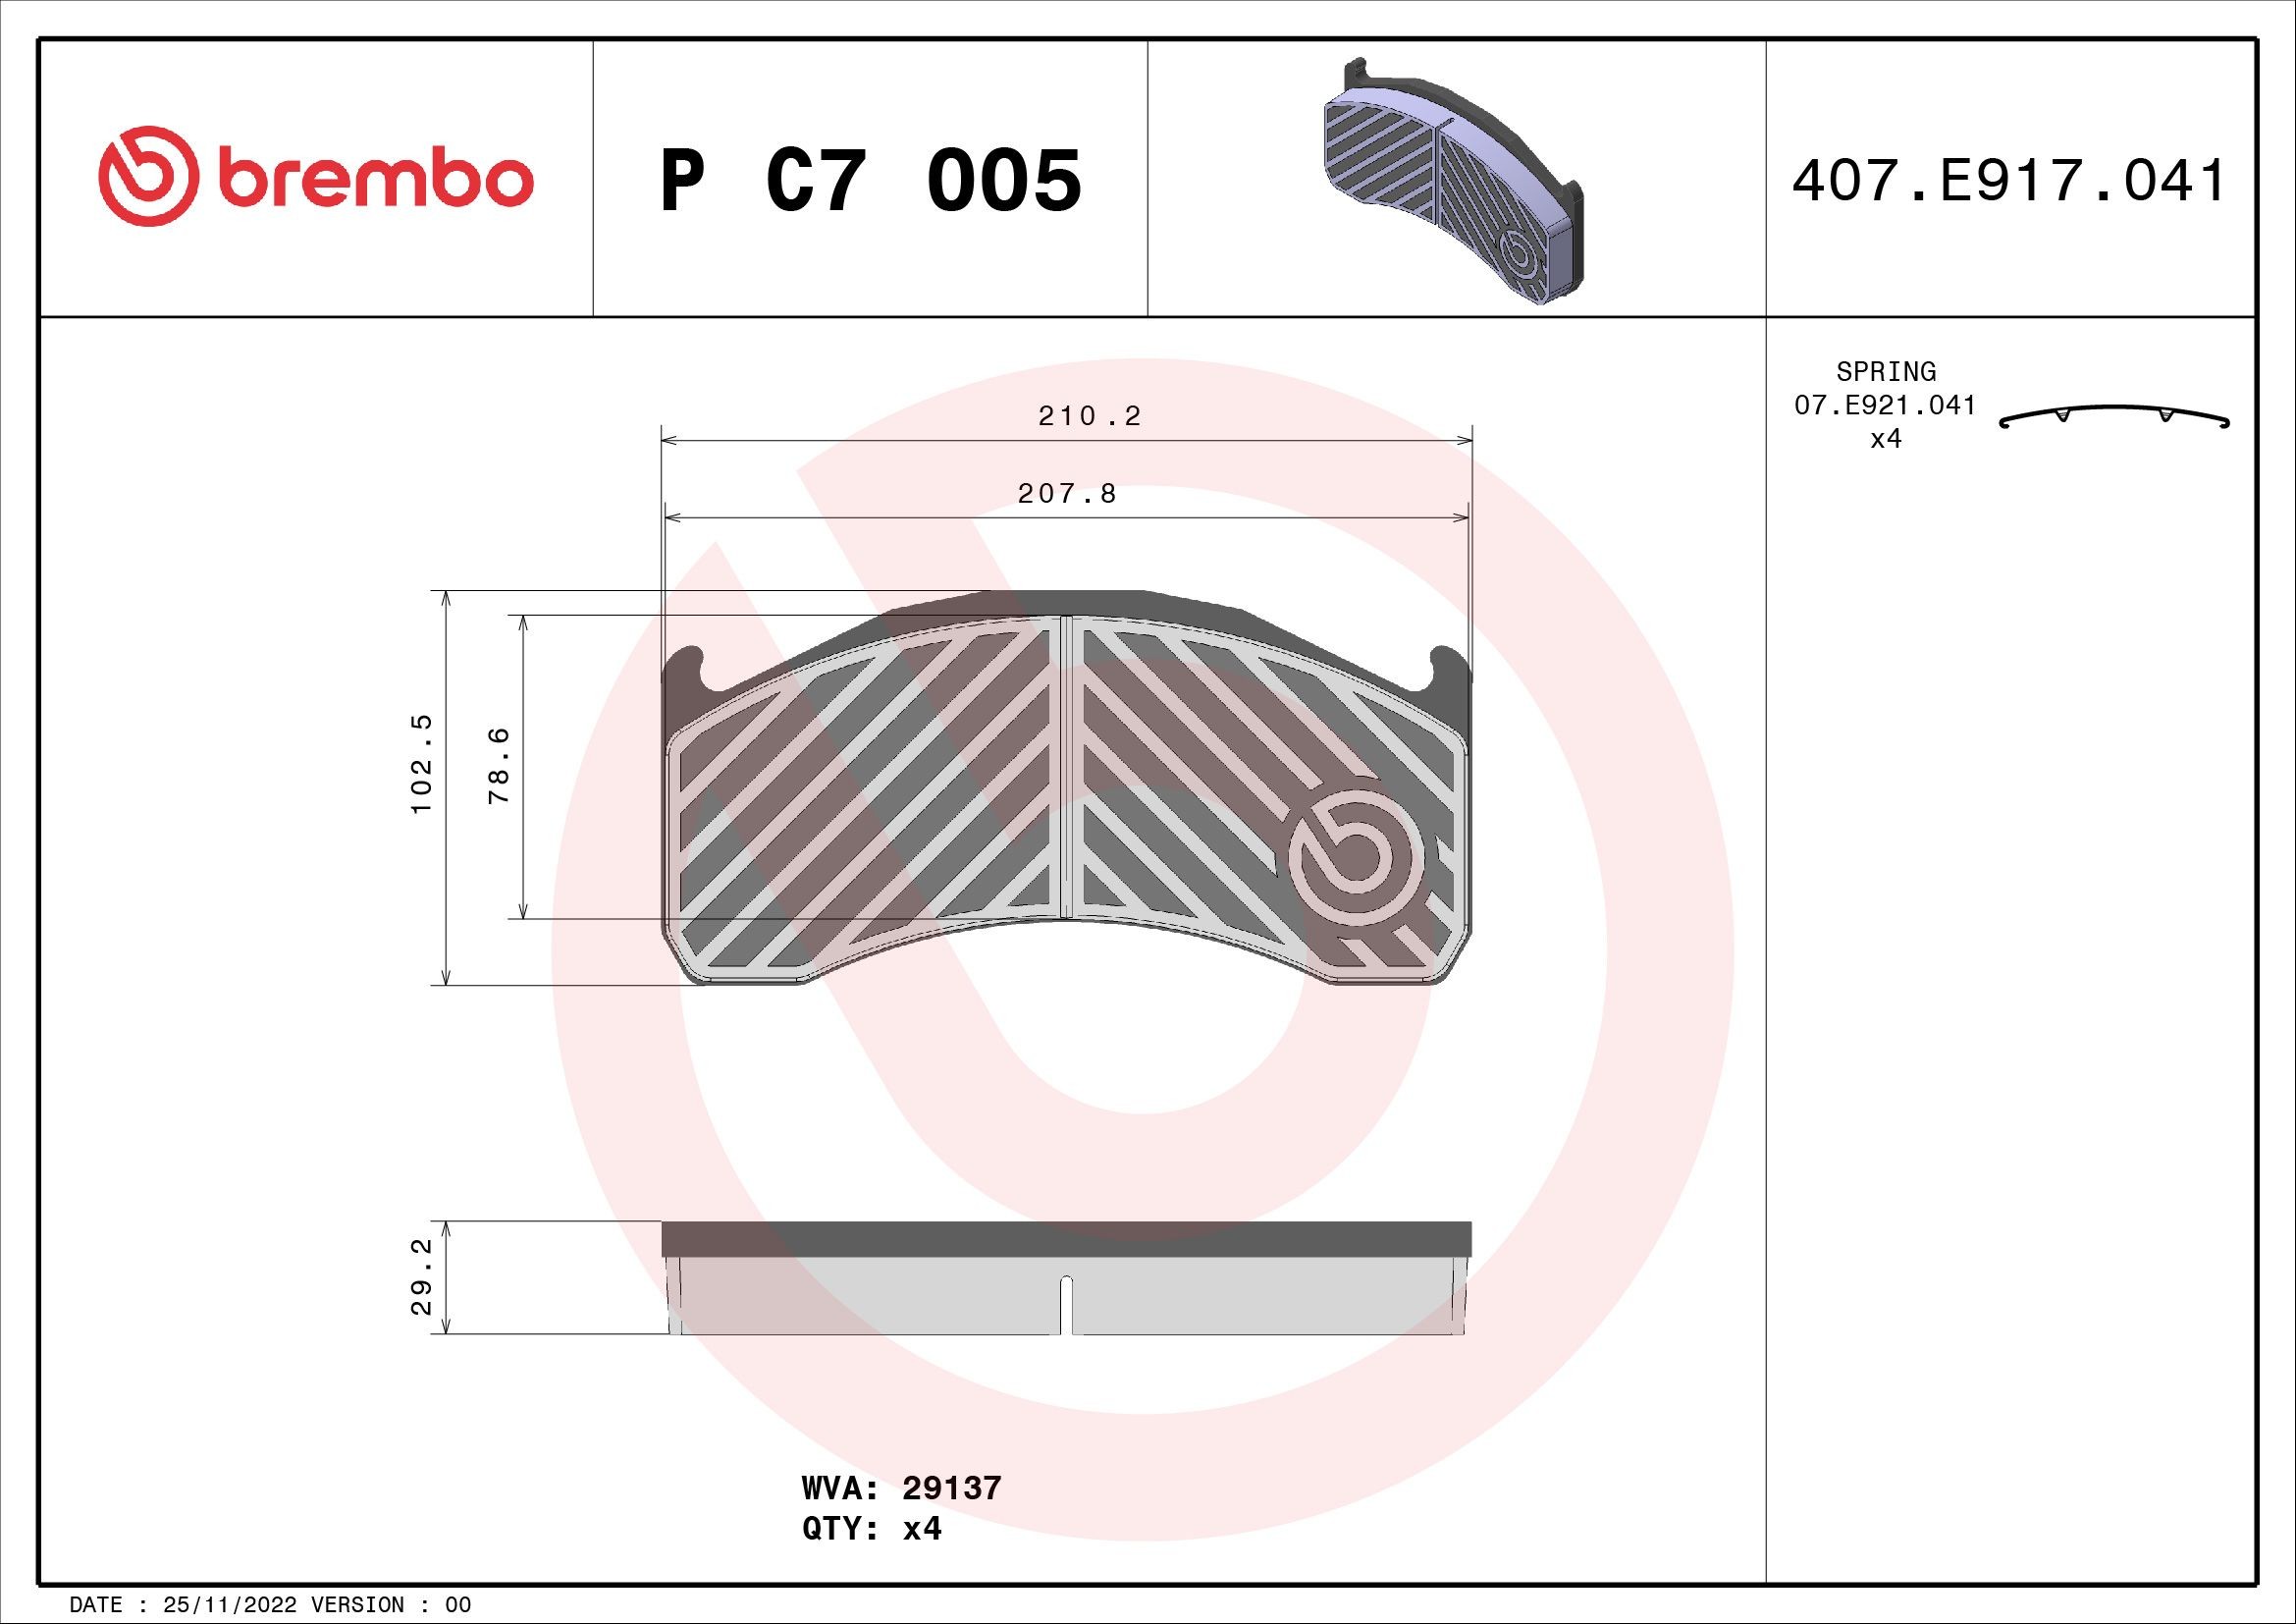 BREMBO P C7 005 Brake pad set excl. wear warning contact, with accessories